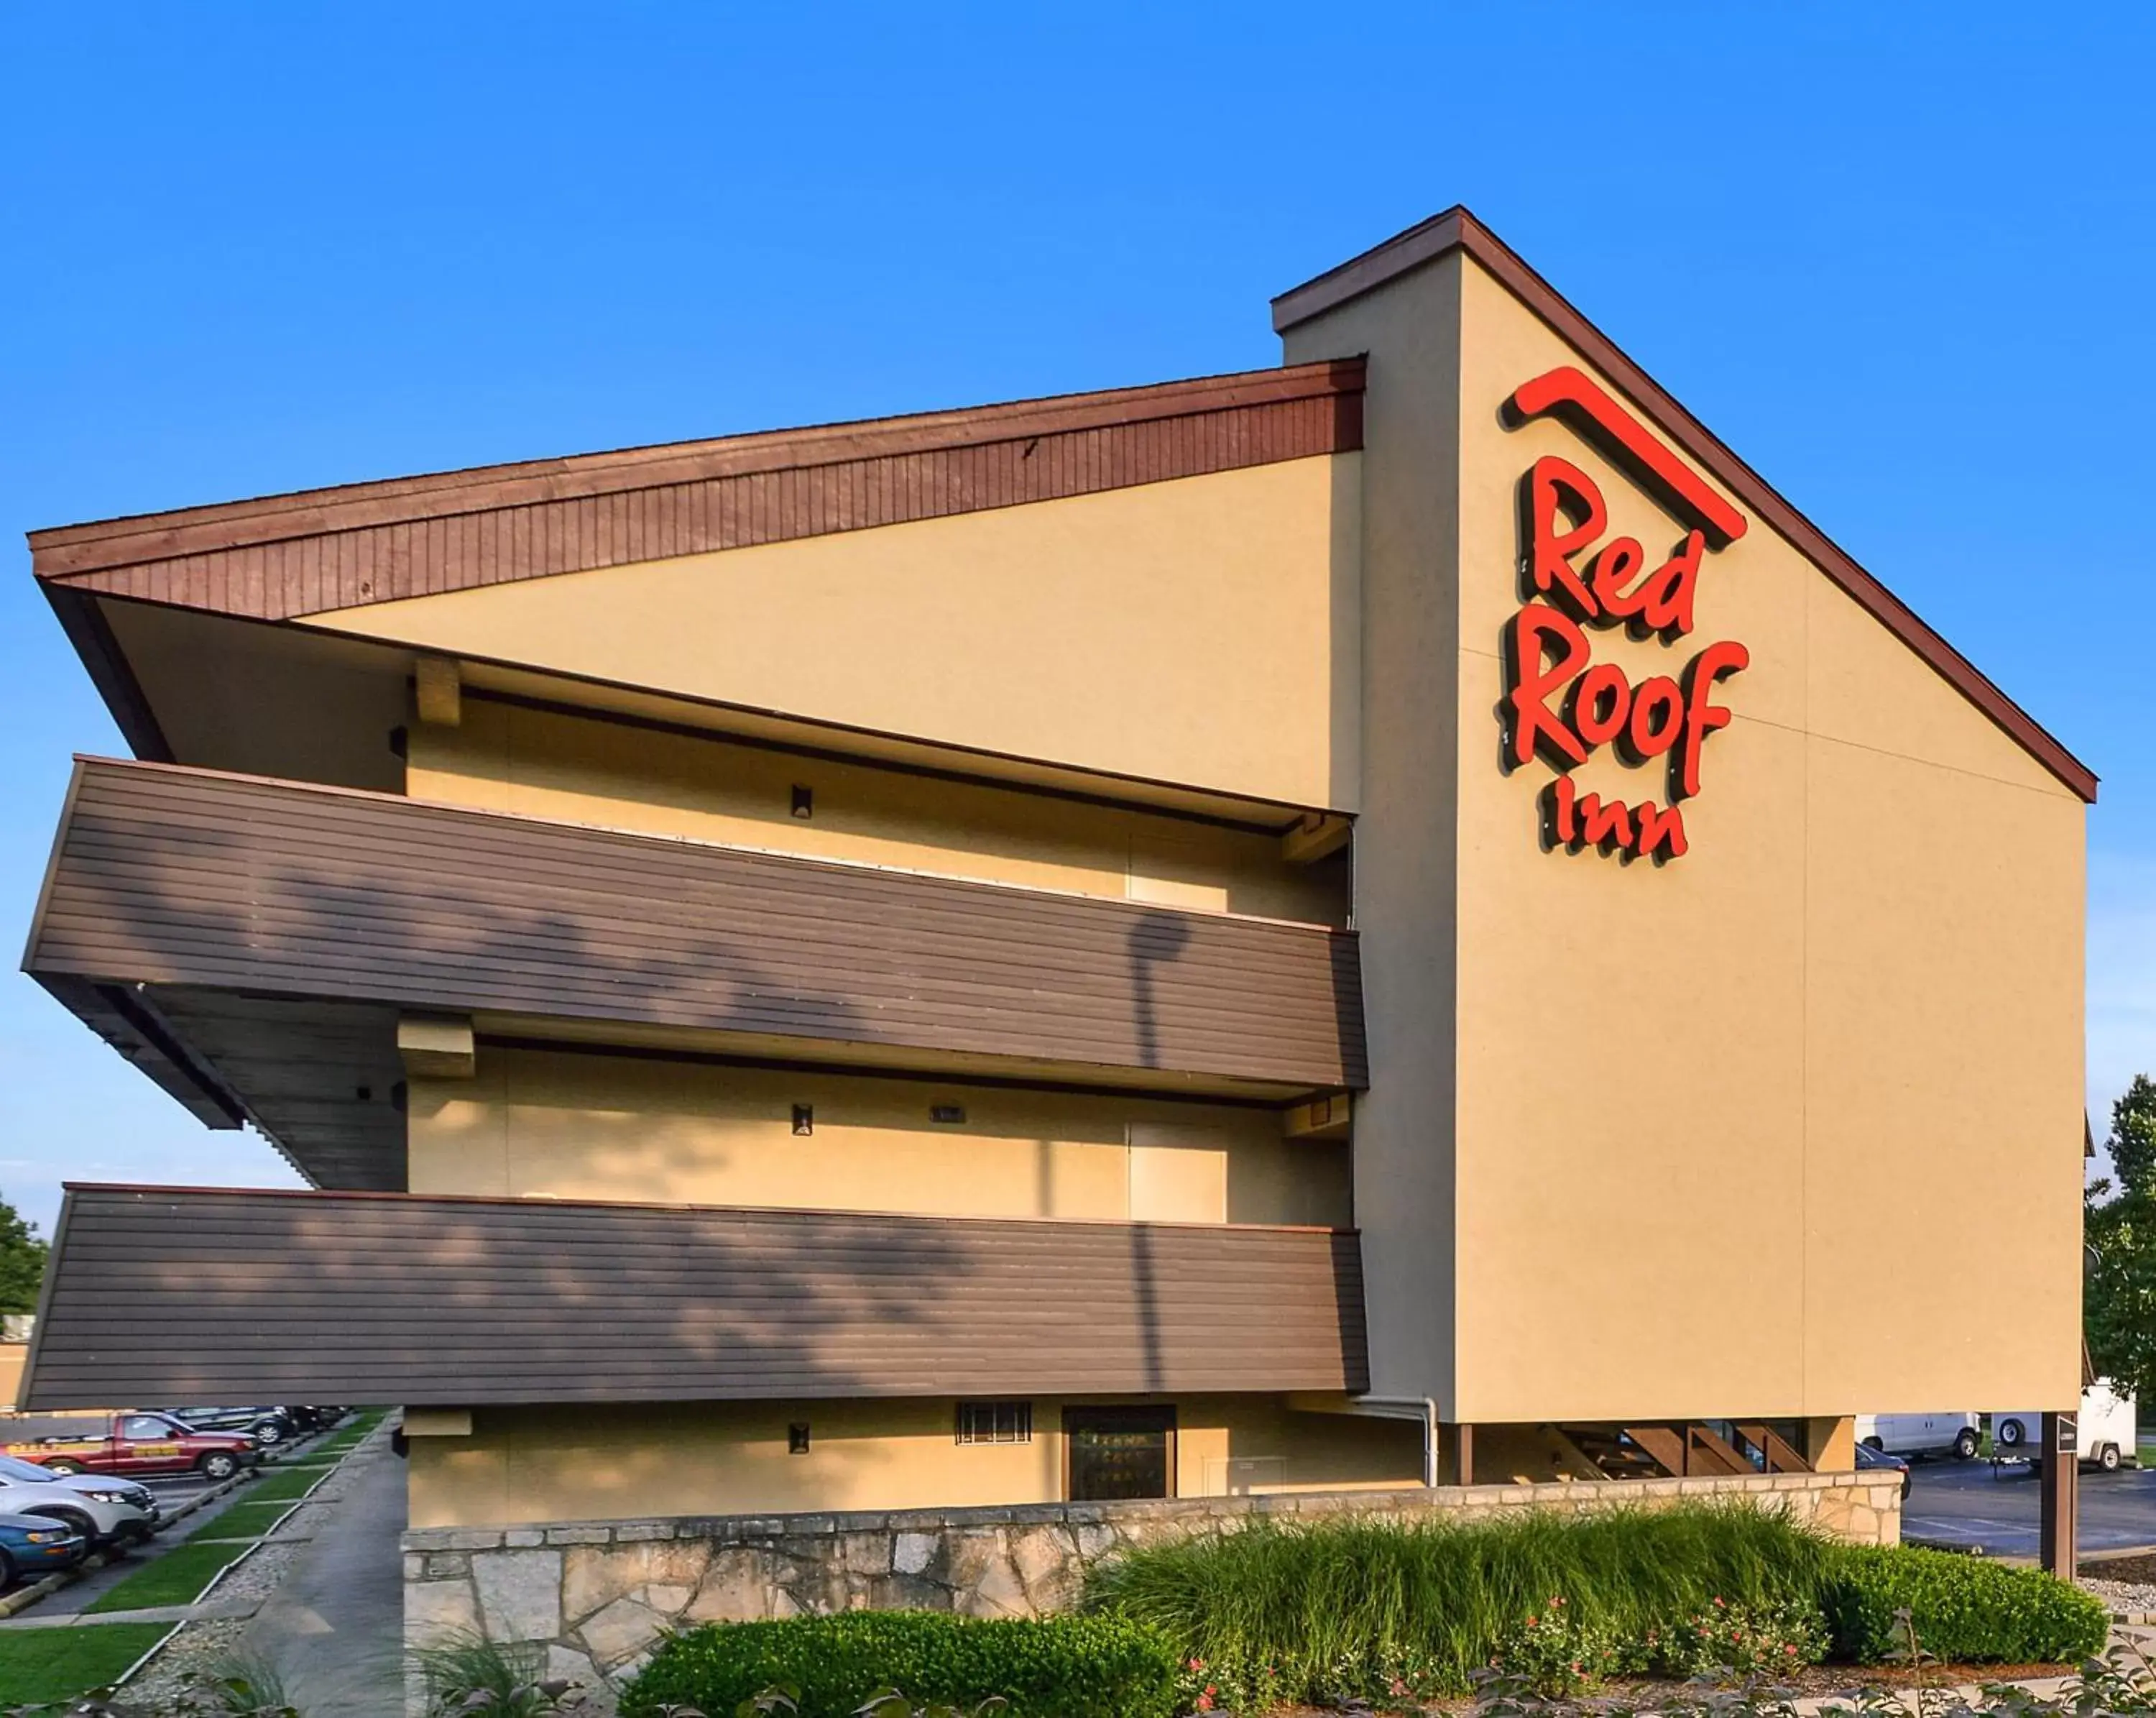 Property building in Red Roof Inn Lexington South